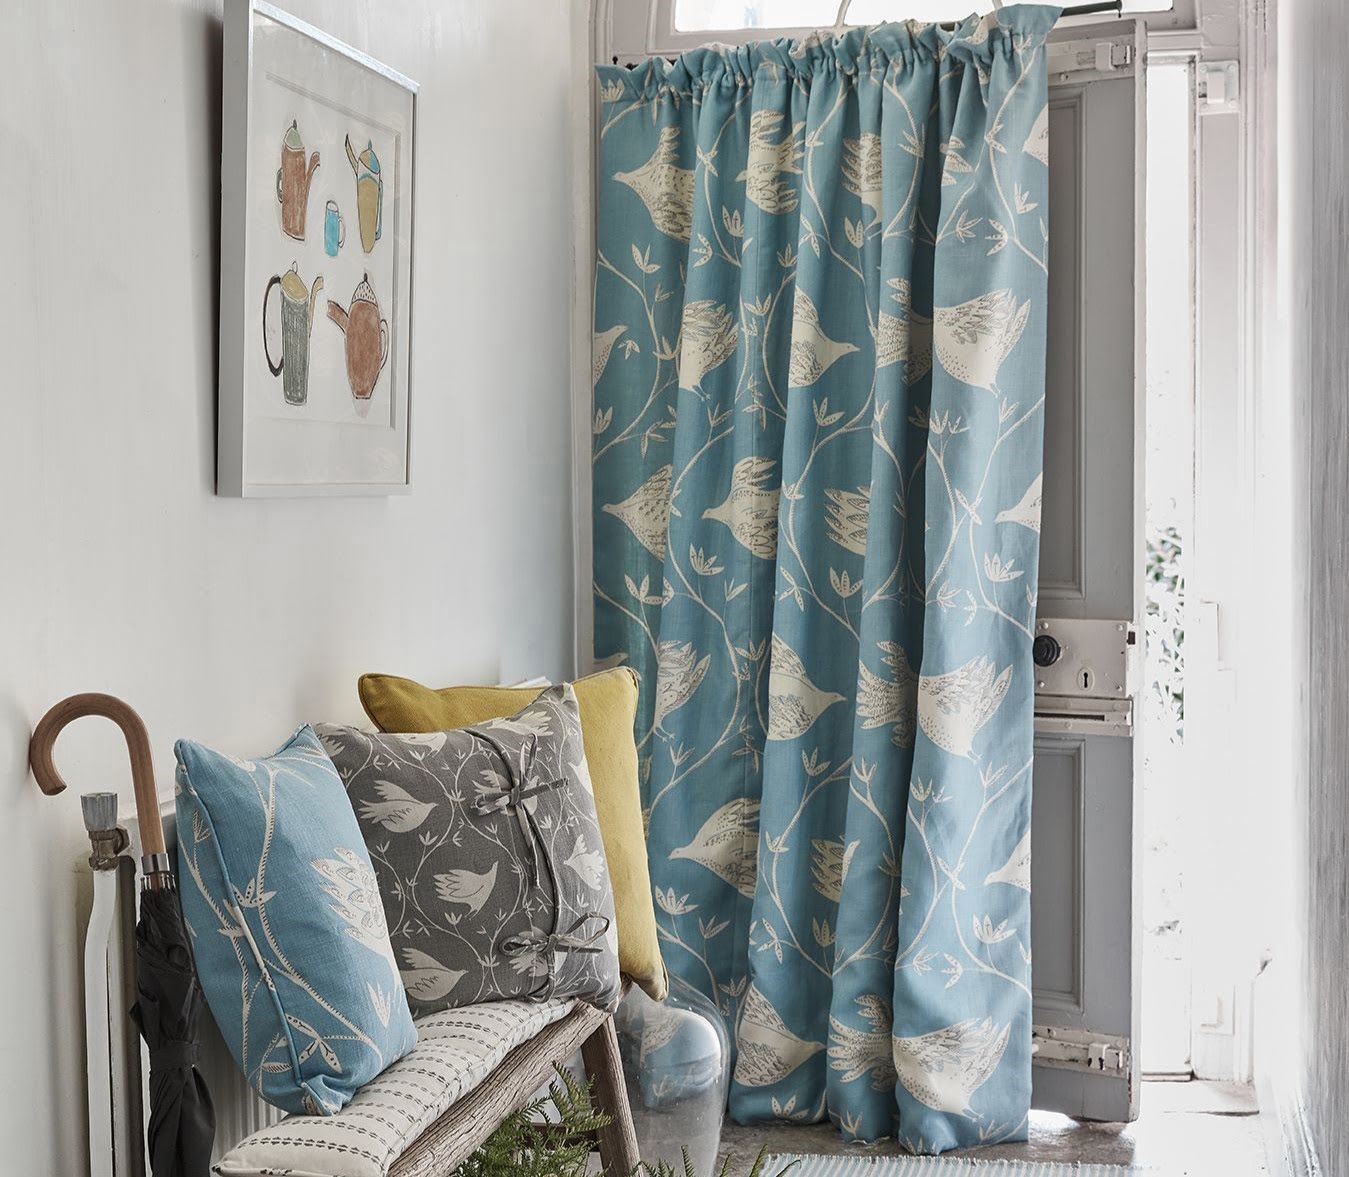 How To Make Doorway Curtains | Storables